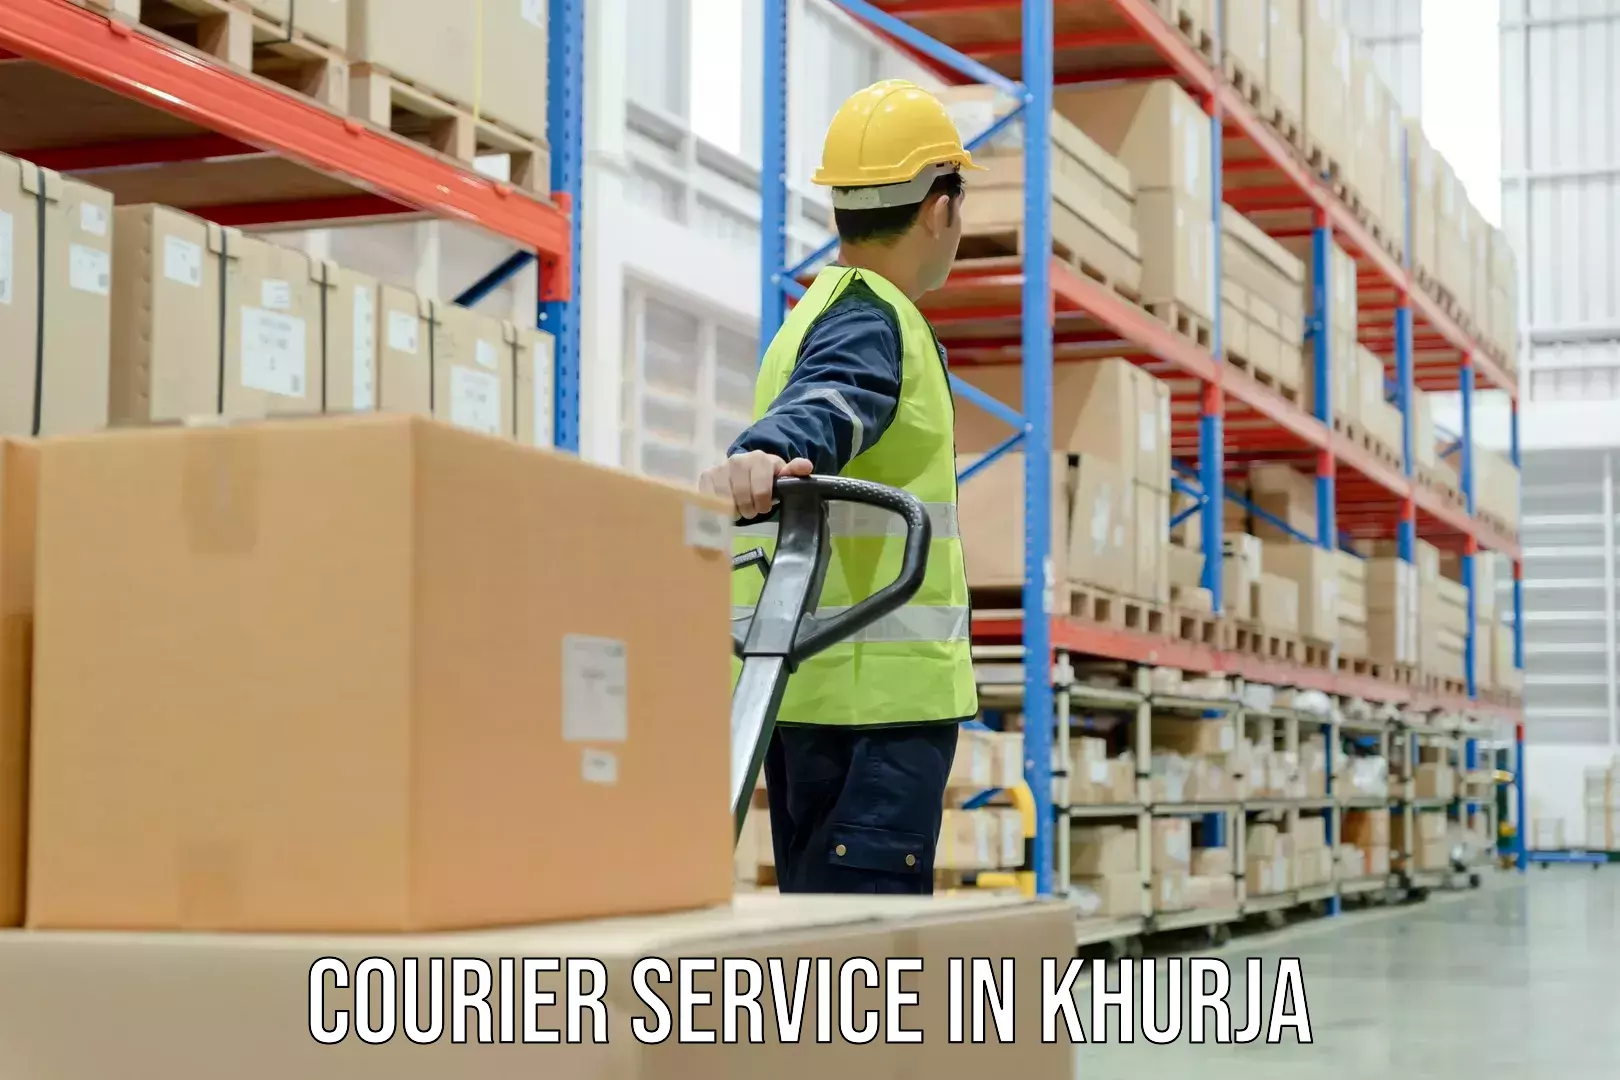 Small parcel delivery in Khurja